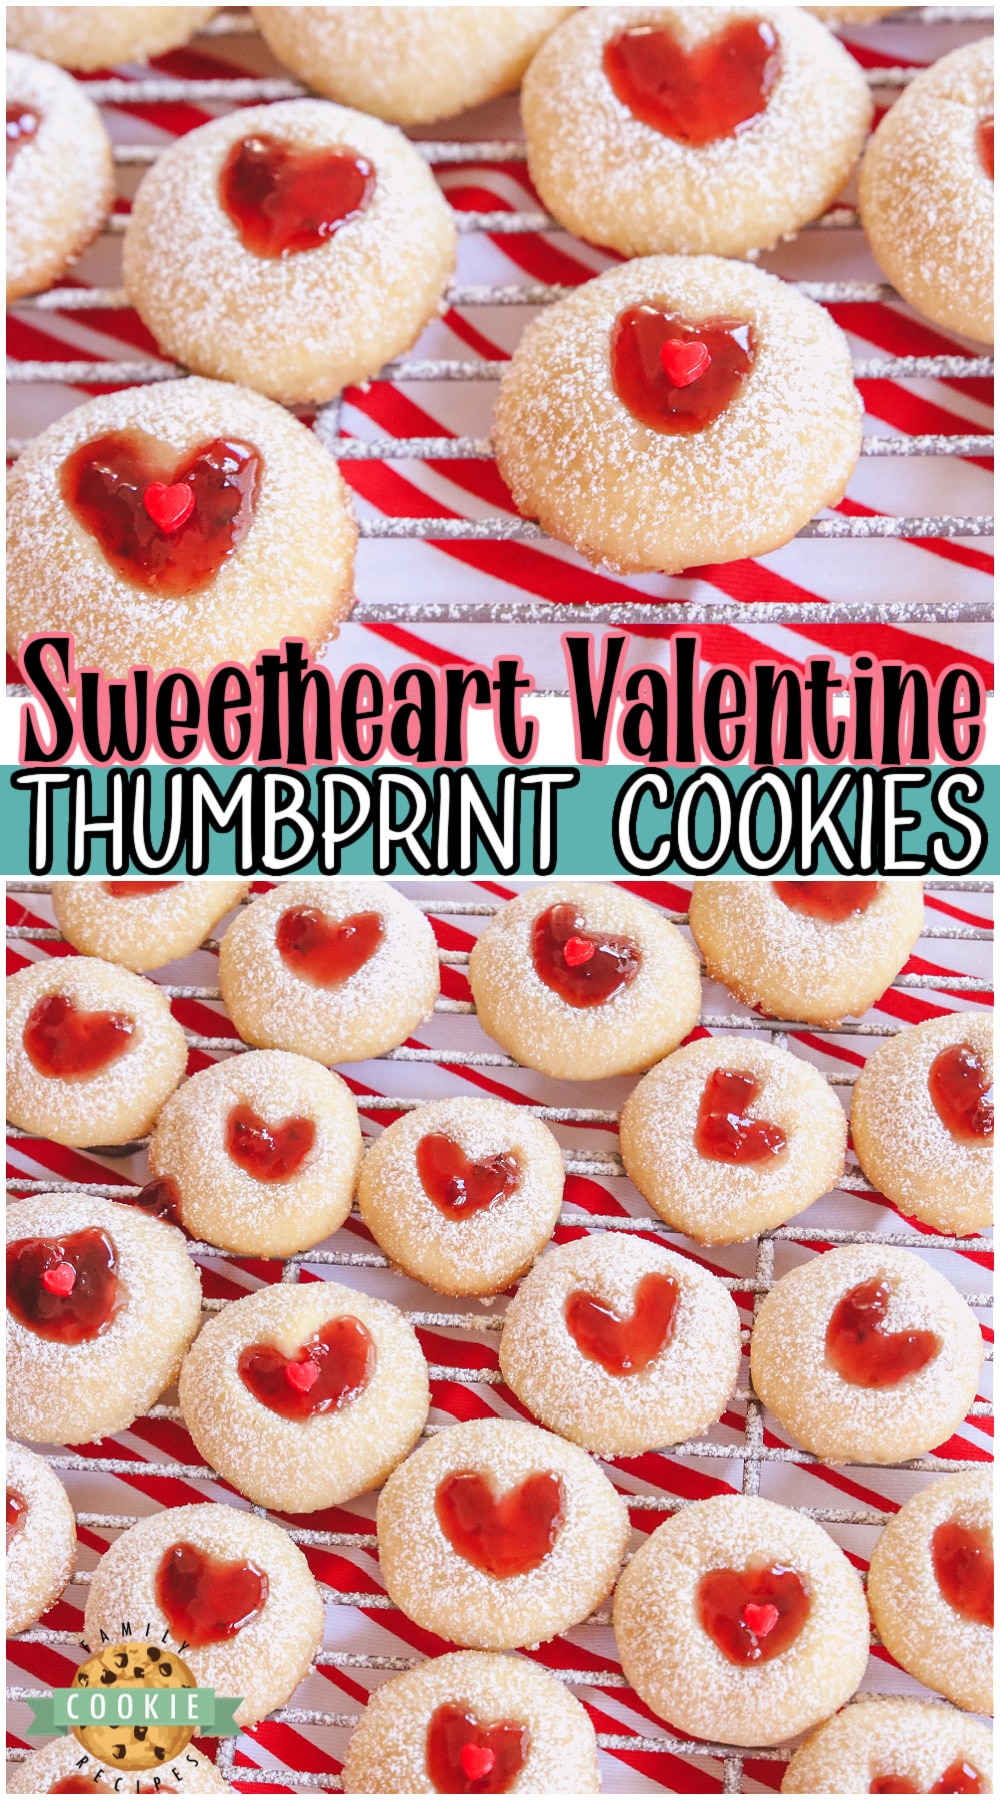 Sweetheart Valentine Thumbprint Cookies are a perfect sweet treat to bake! They're tender, buttery cookies filled with sweet berry jam in the shape of a heart! via @buttergirls